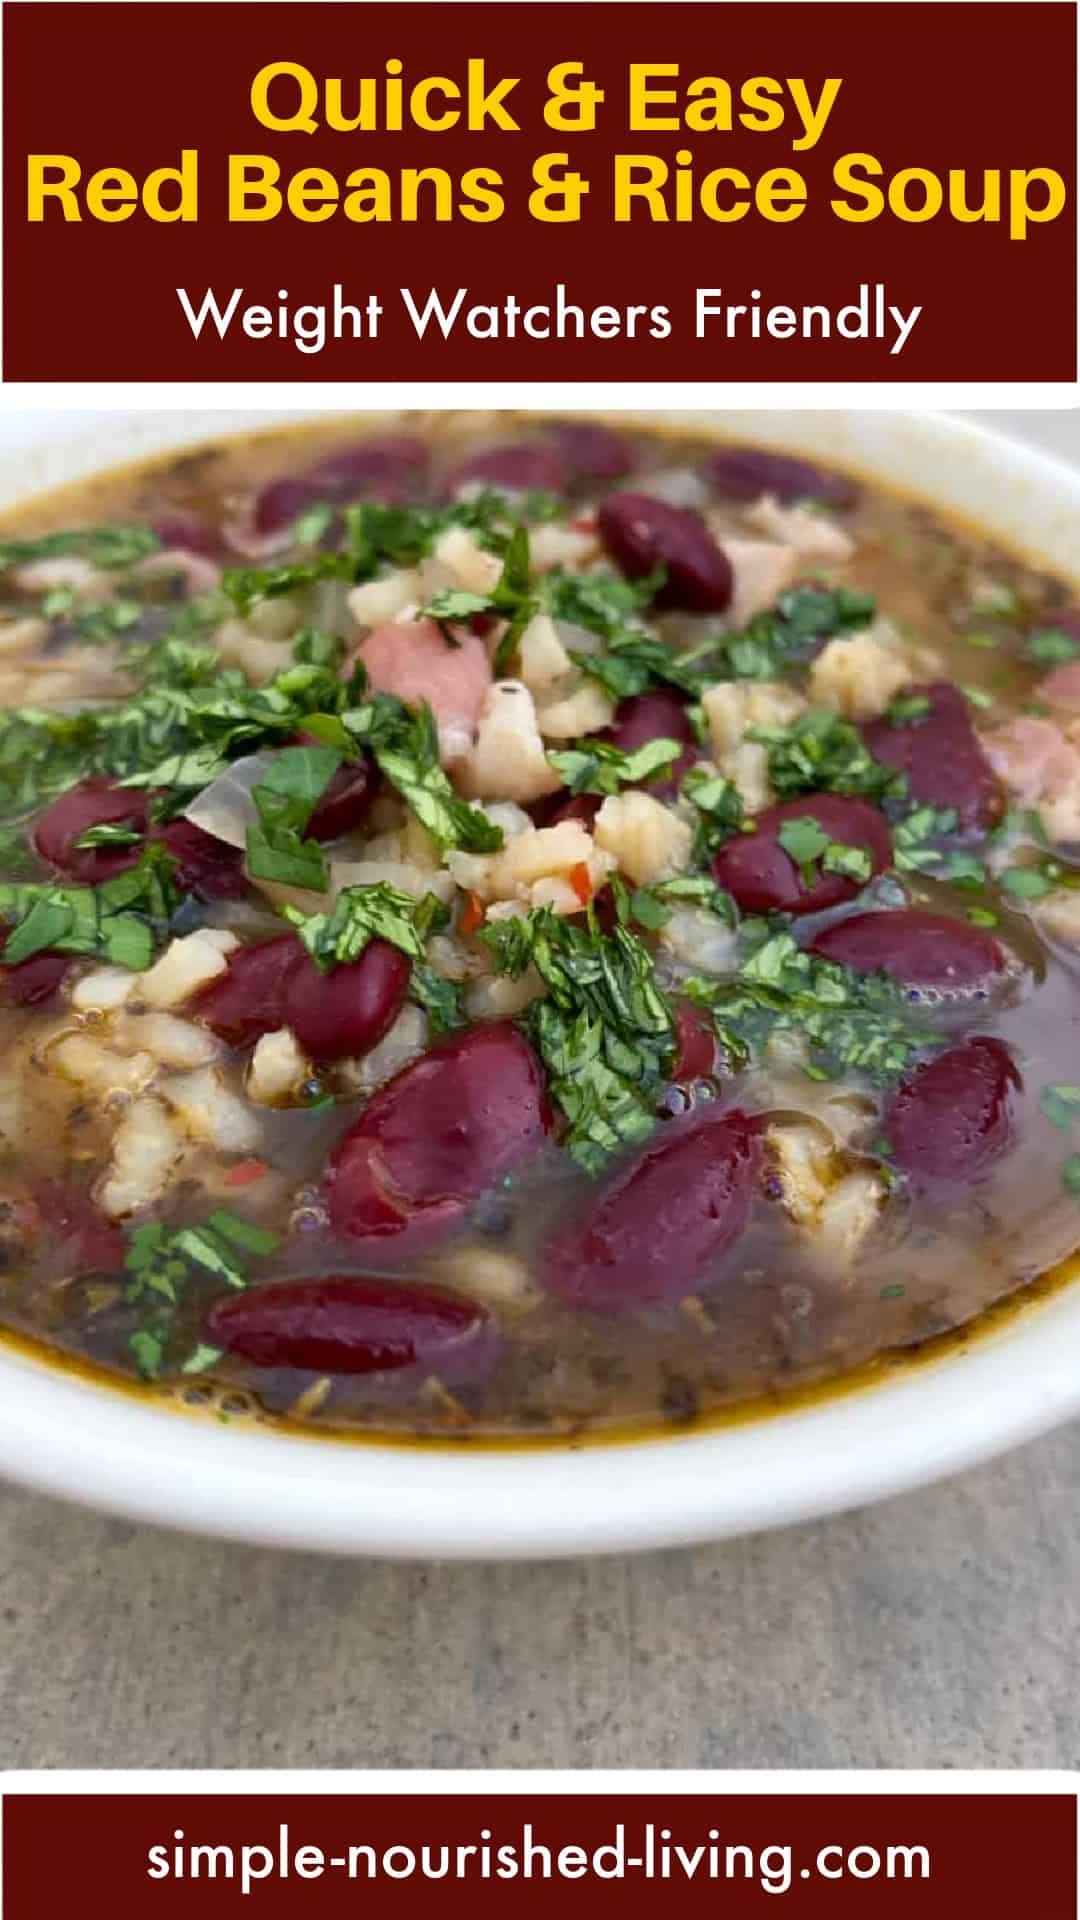 Red Beans and Rice Soup garnished with cilantro in white bowl with Text Box: Quick and Easy Red Beans and Rice Soup. Weight Watchers Friendly.